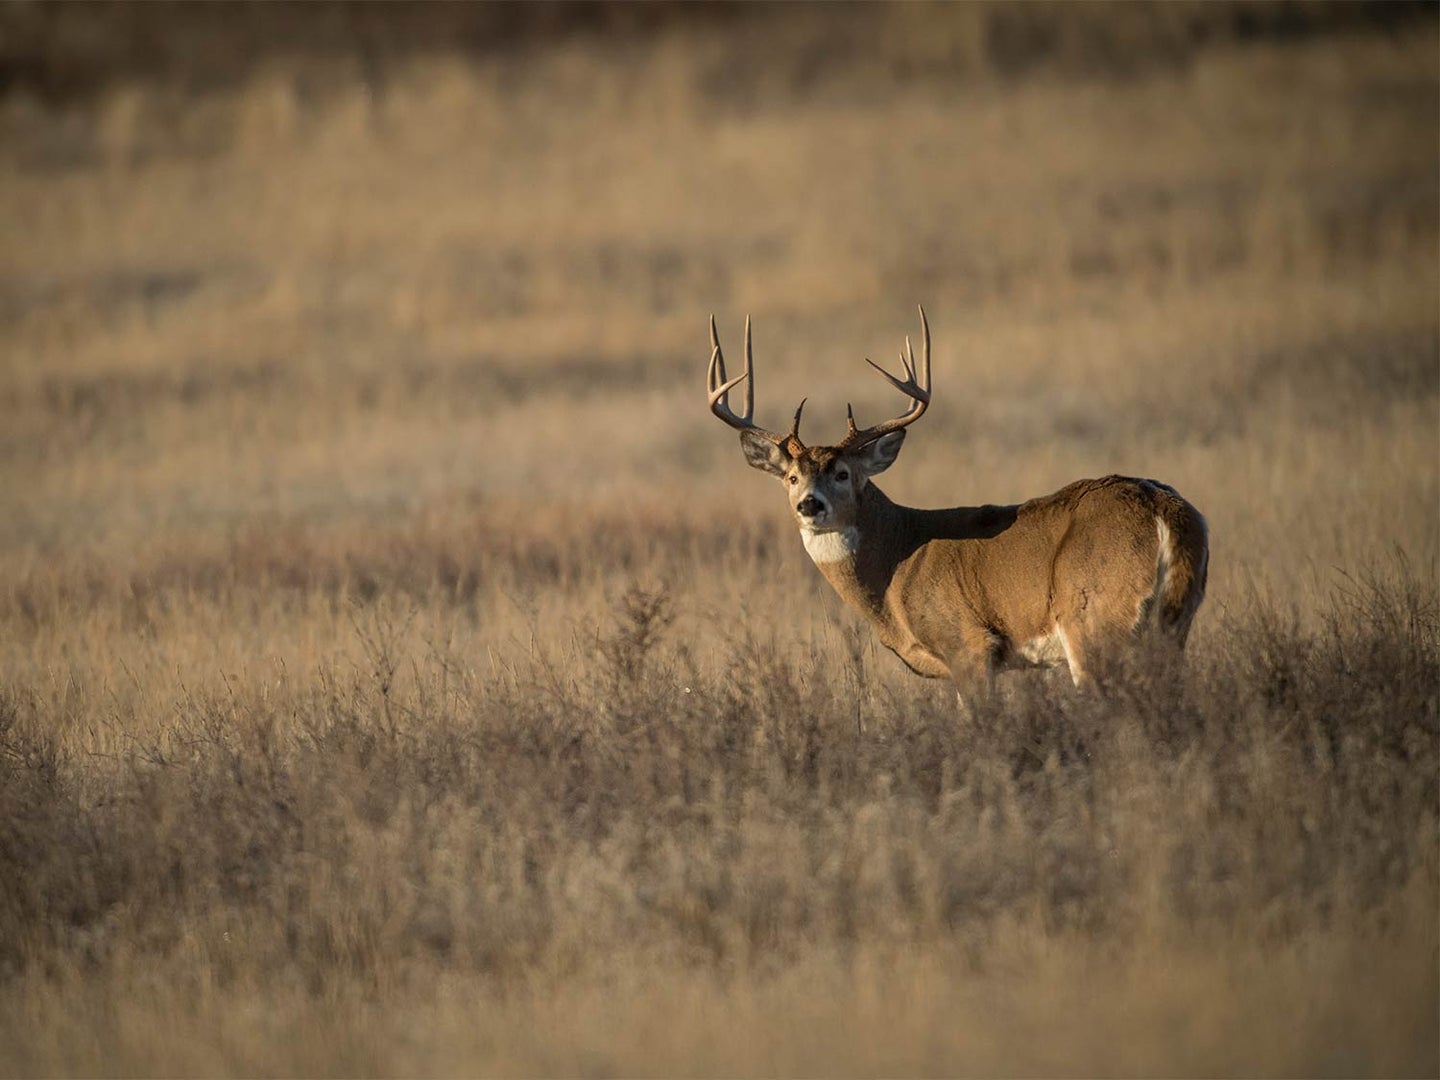 A single whitetail deer stands in a large open field of brown grass.